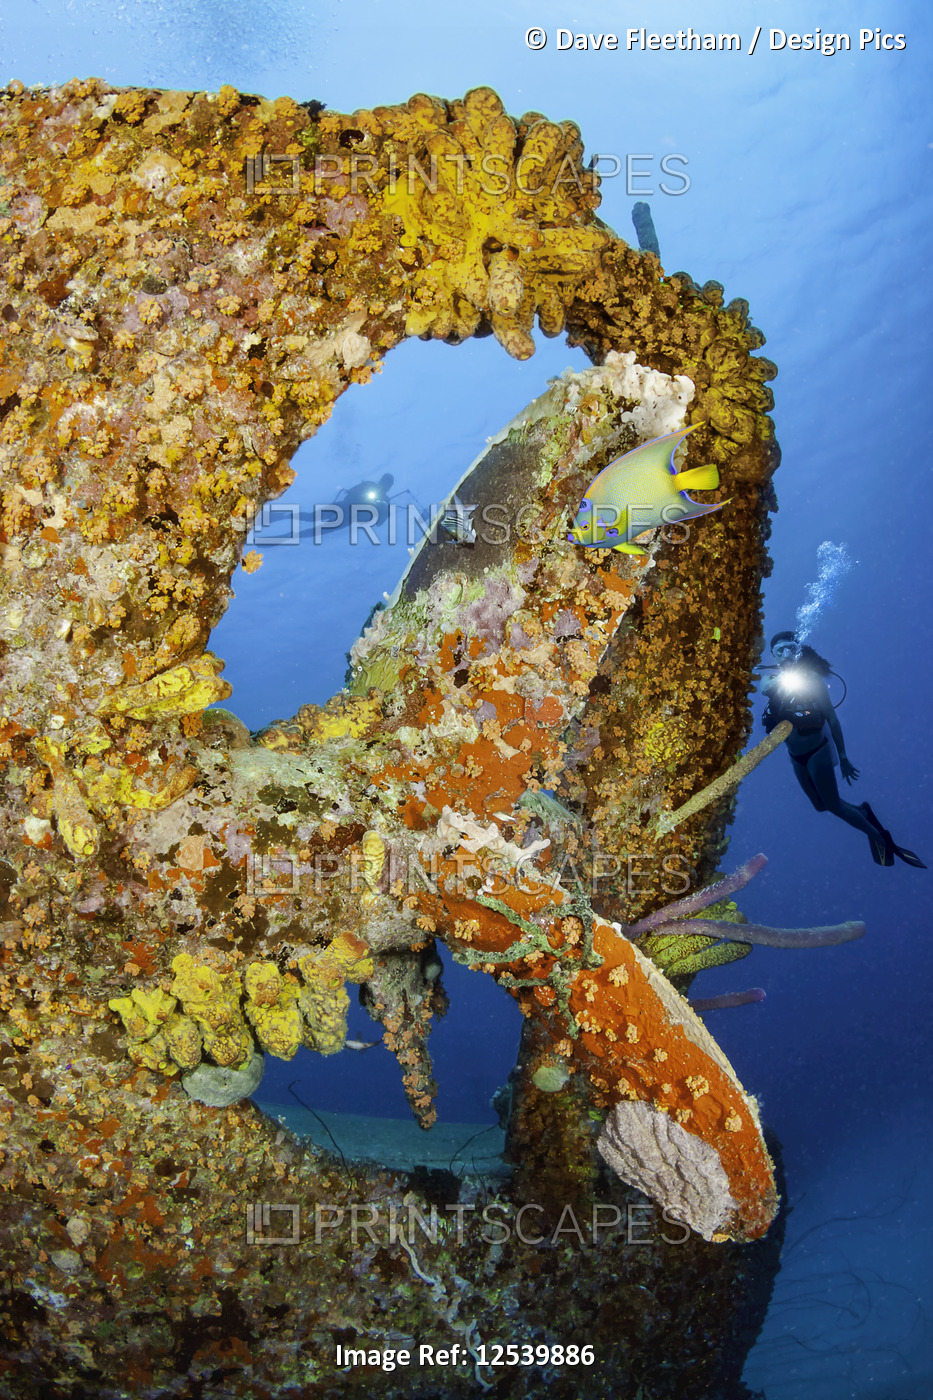 Divers and a queen angelfish (Holacanthus ciliaris) around the prop on the ...